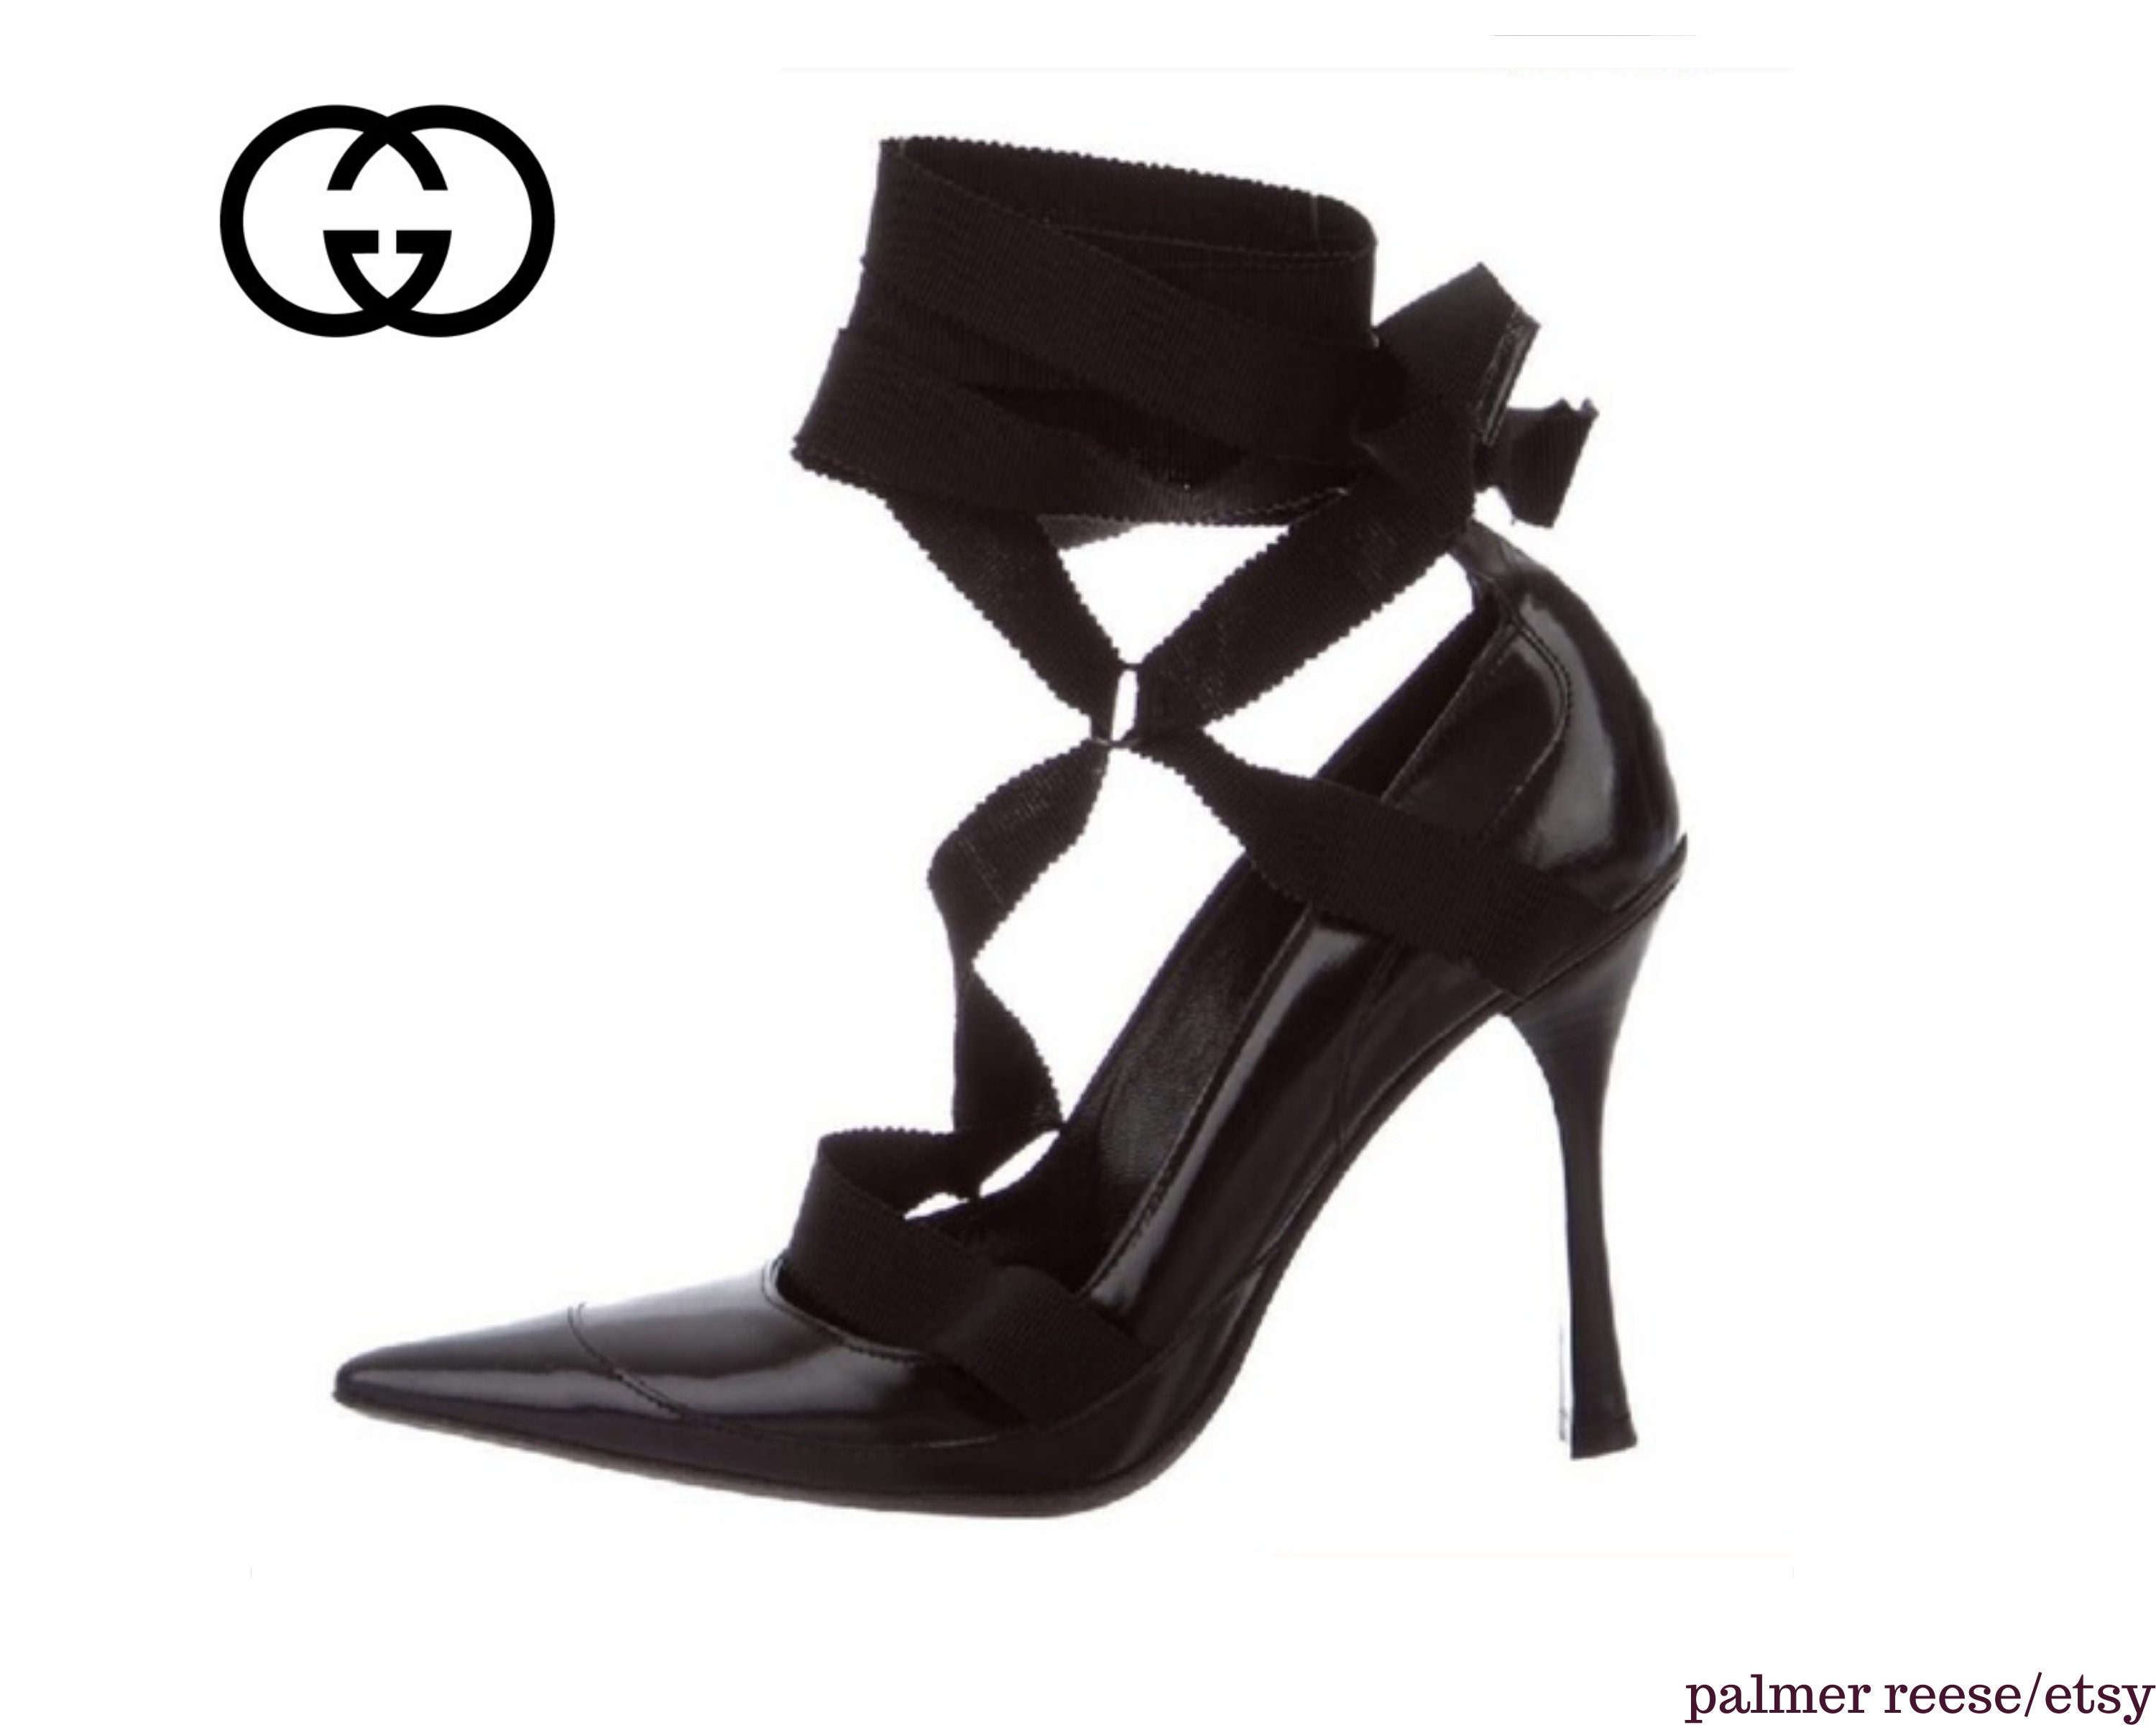 TOM FORD for Gucci Black Leather and Ribbon Sexy Stiletto Pump